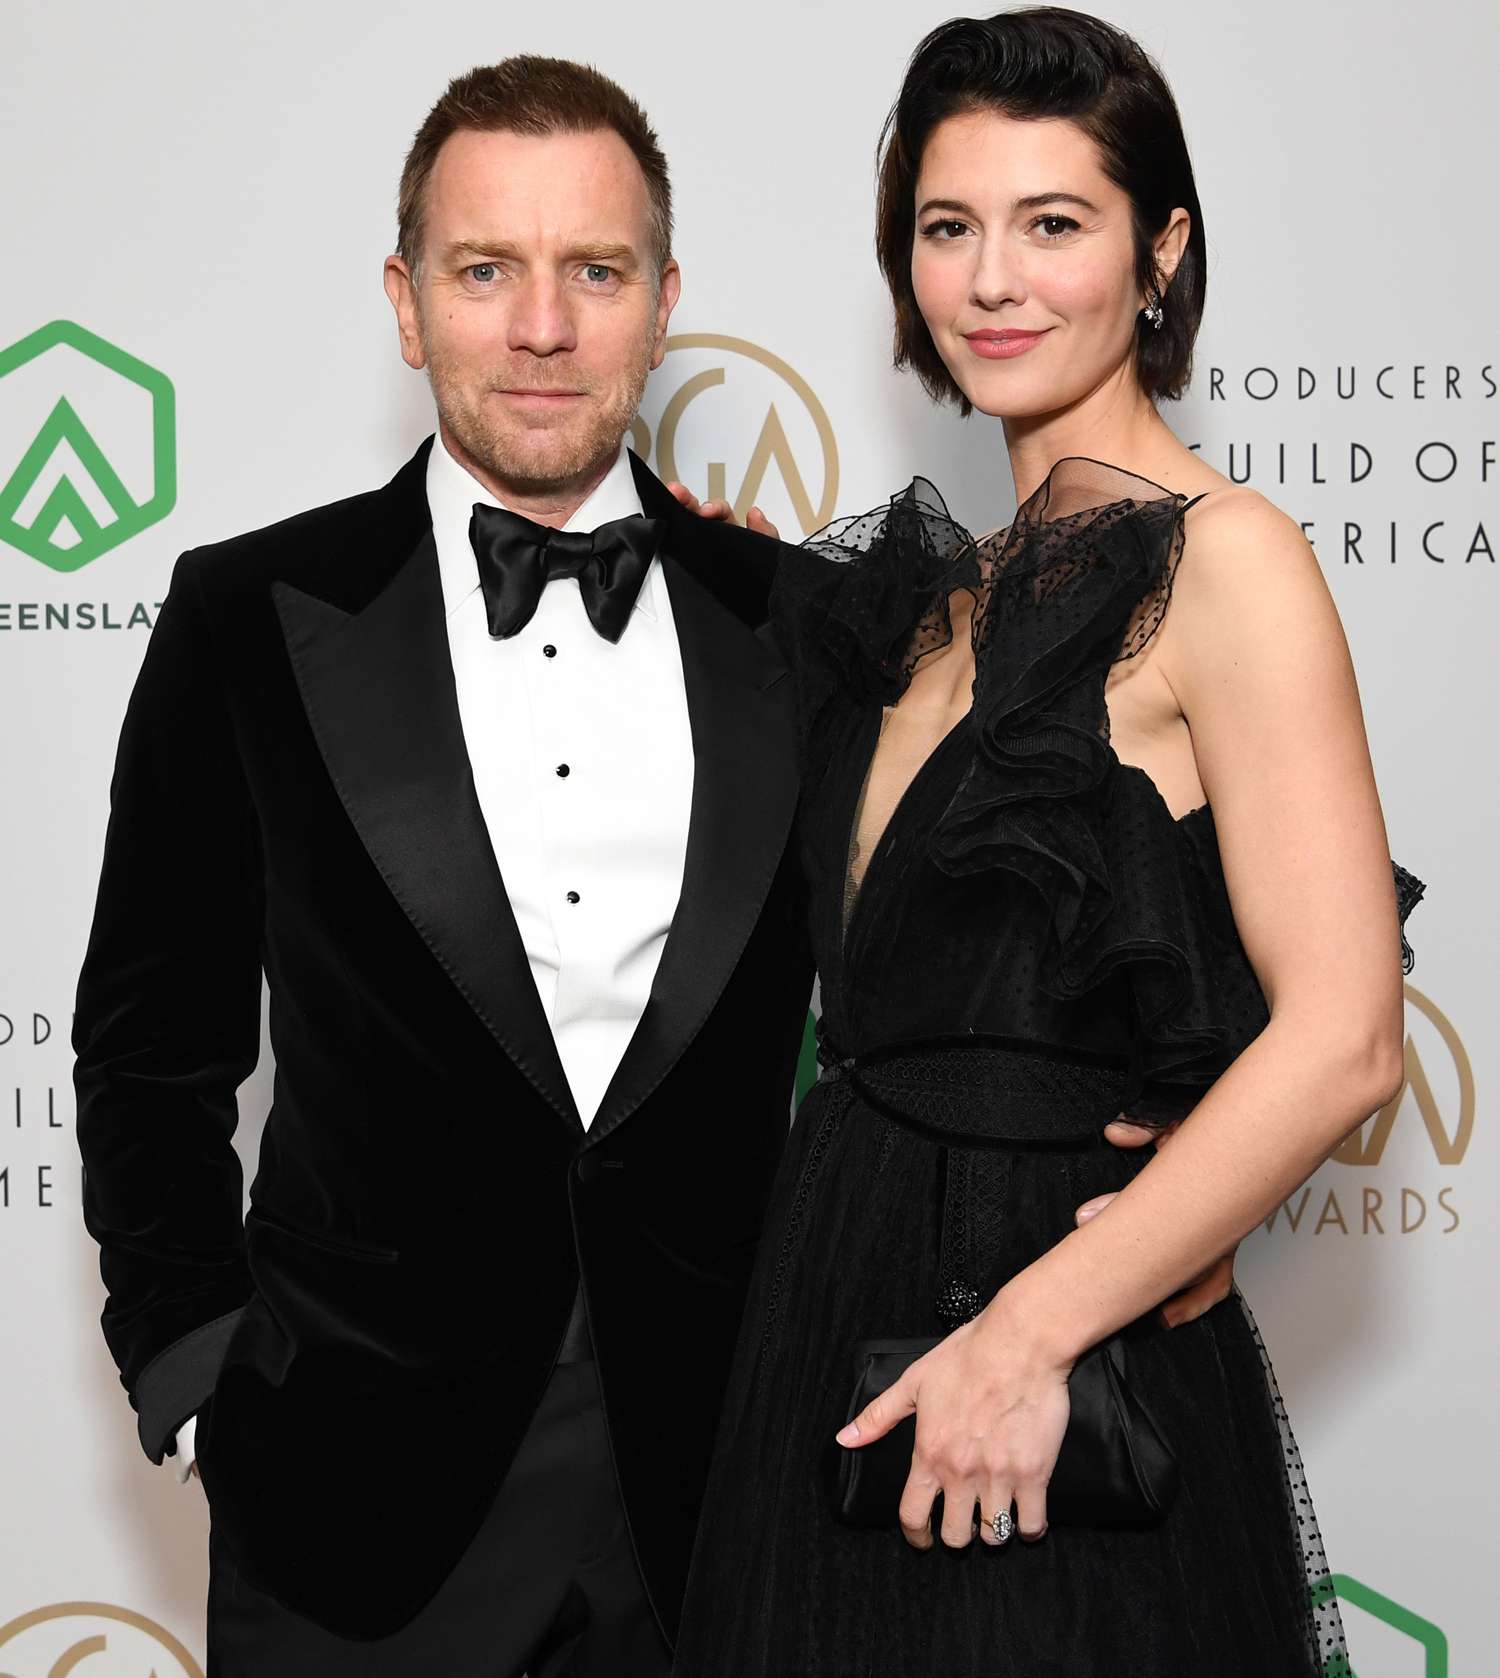 Date Night! Ewan McGregor and Mary Elizabeth Winstead Walk Red Carpet at Producers Guild Awards